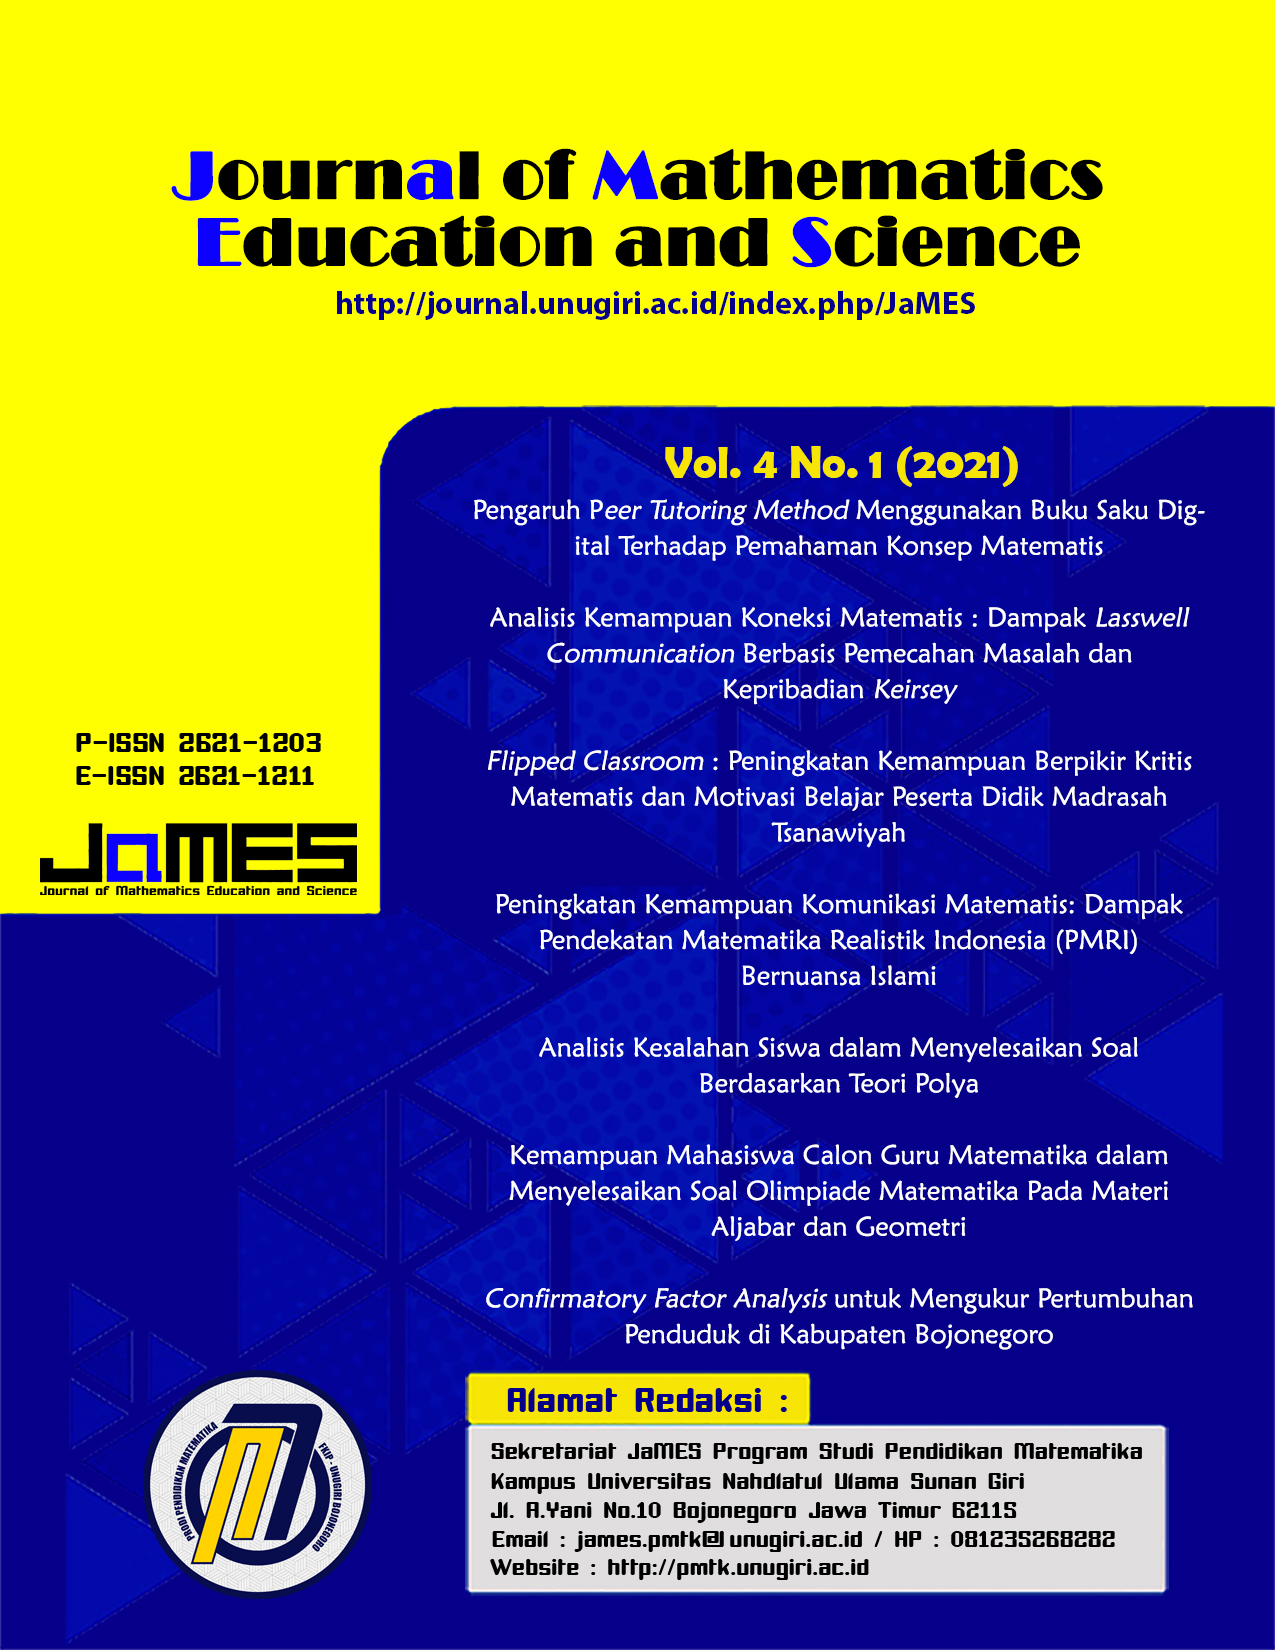 					View Vol. 4 No. 1 (2021): Journal of Mathematics Education and Science
				